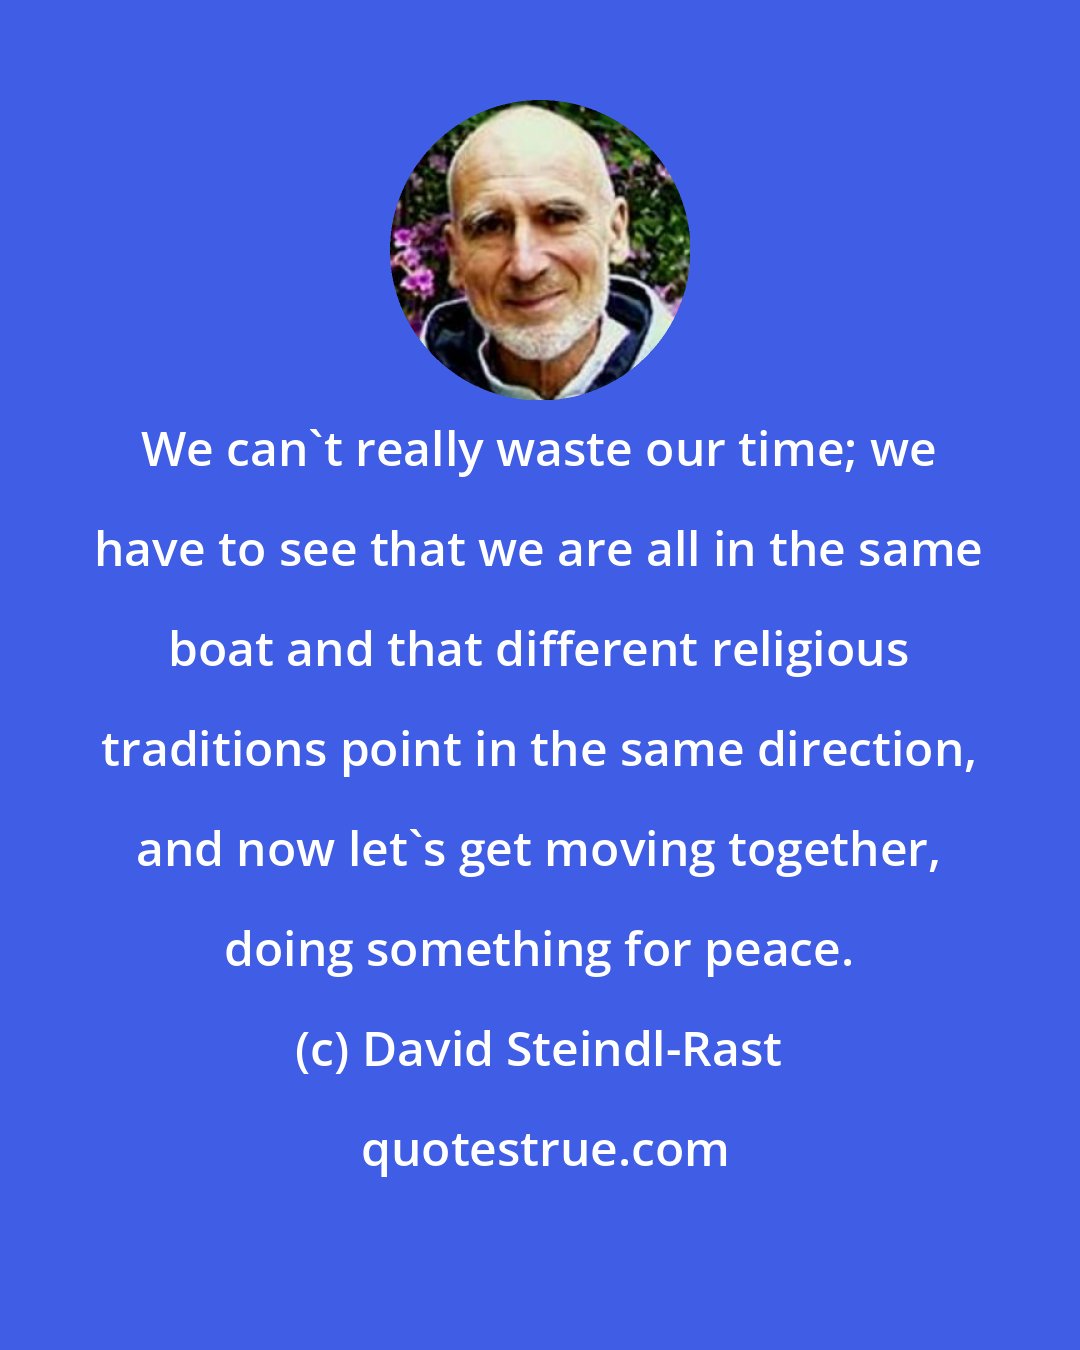 David Steindl-Rast: We can't really waste our time; we have to see that we are all in the same boat and that different religious traditions point in the same direction, and now let's get moving together, doing something for peace.